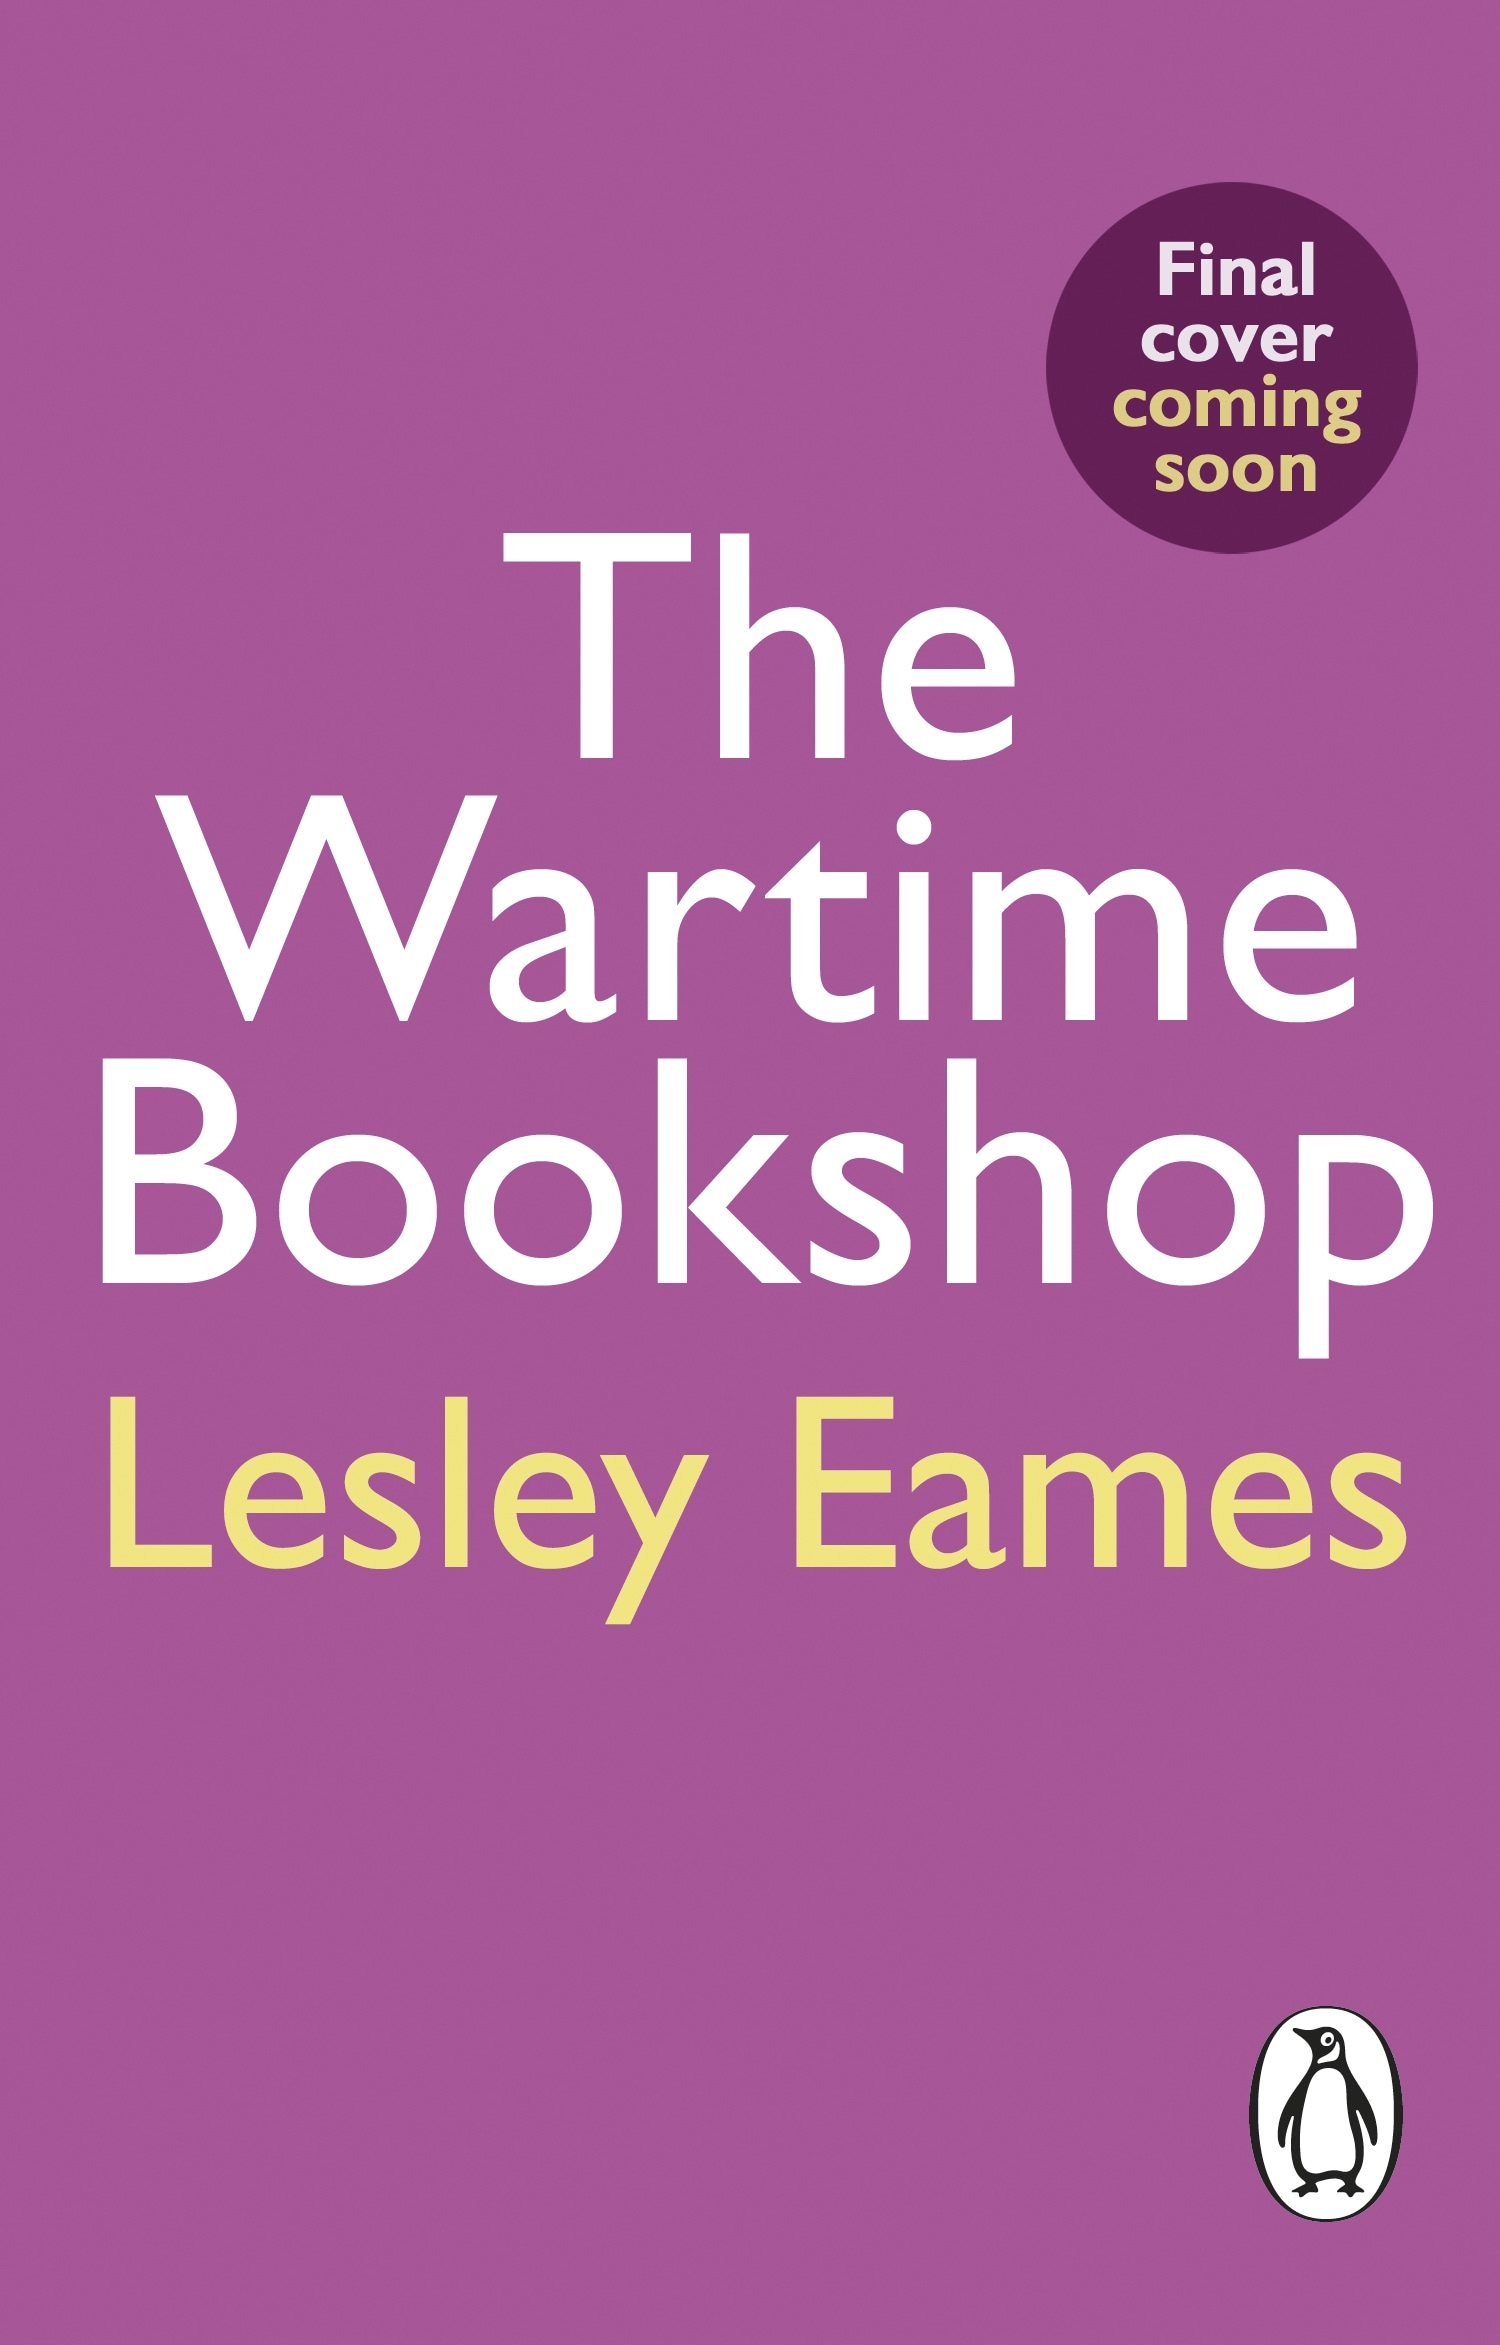 Book “The Wartime Bookshop” by Lesley Eames — October 13, 2022